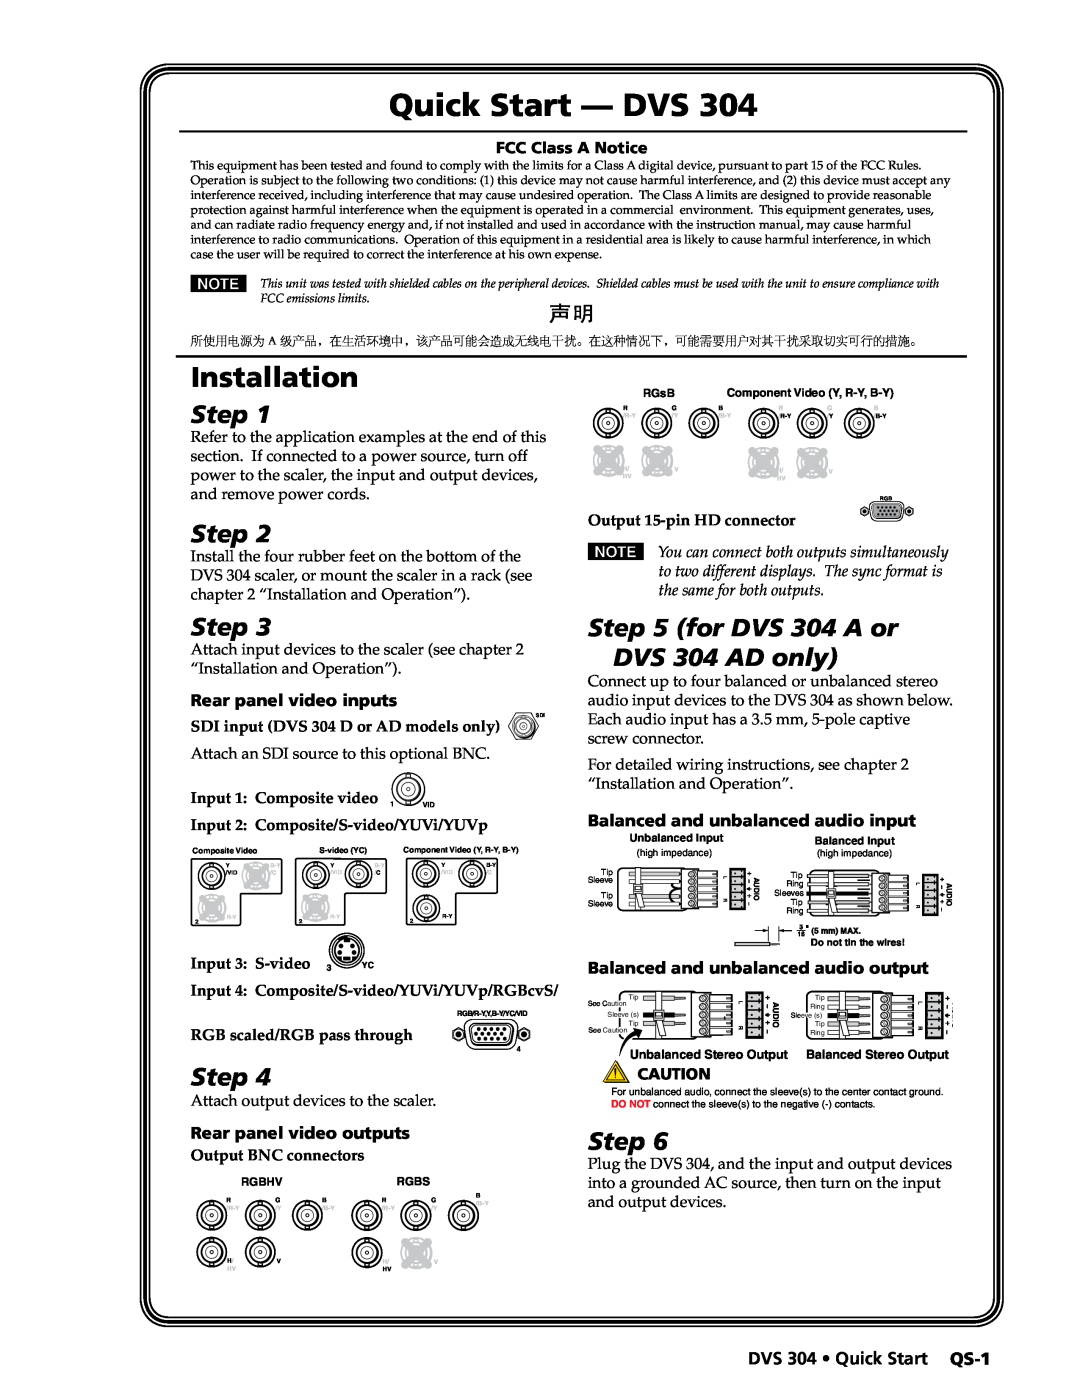 Extron electronic manual Quick Start - DVS, Installation, Step, for DVS 304 A or DVS 304 AD only, FCC Class A Notice 